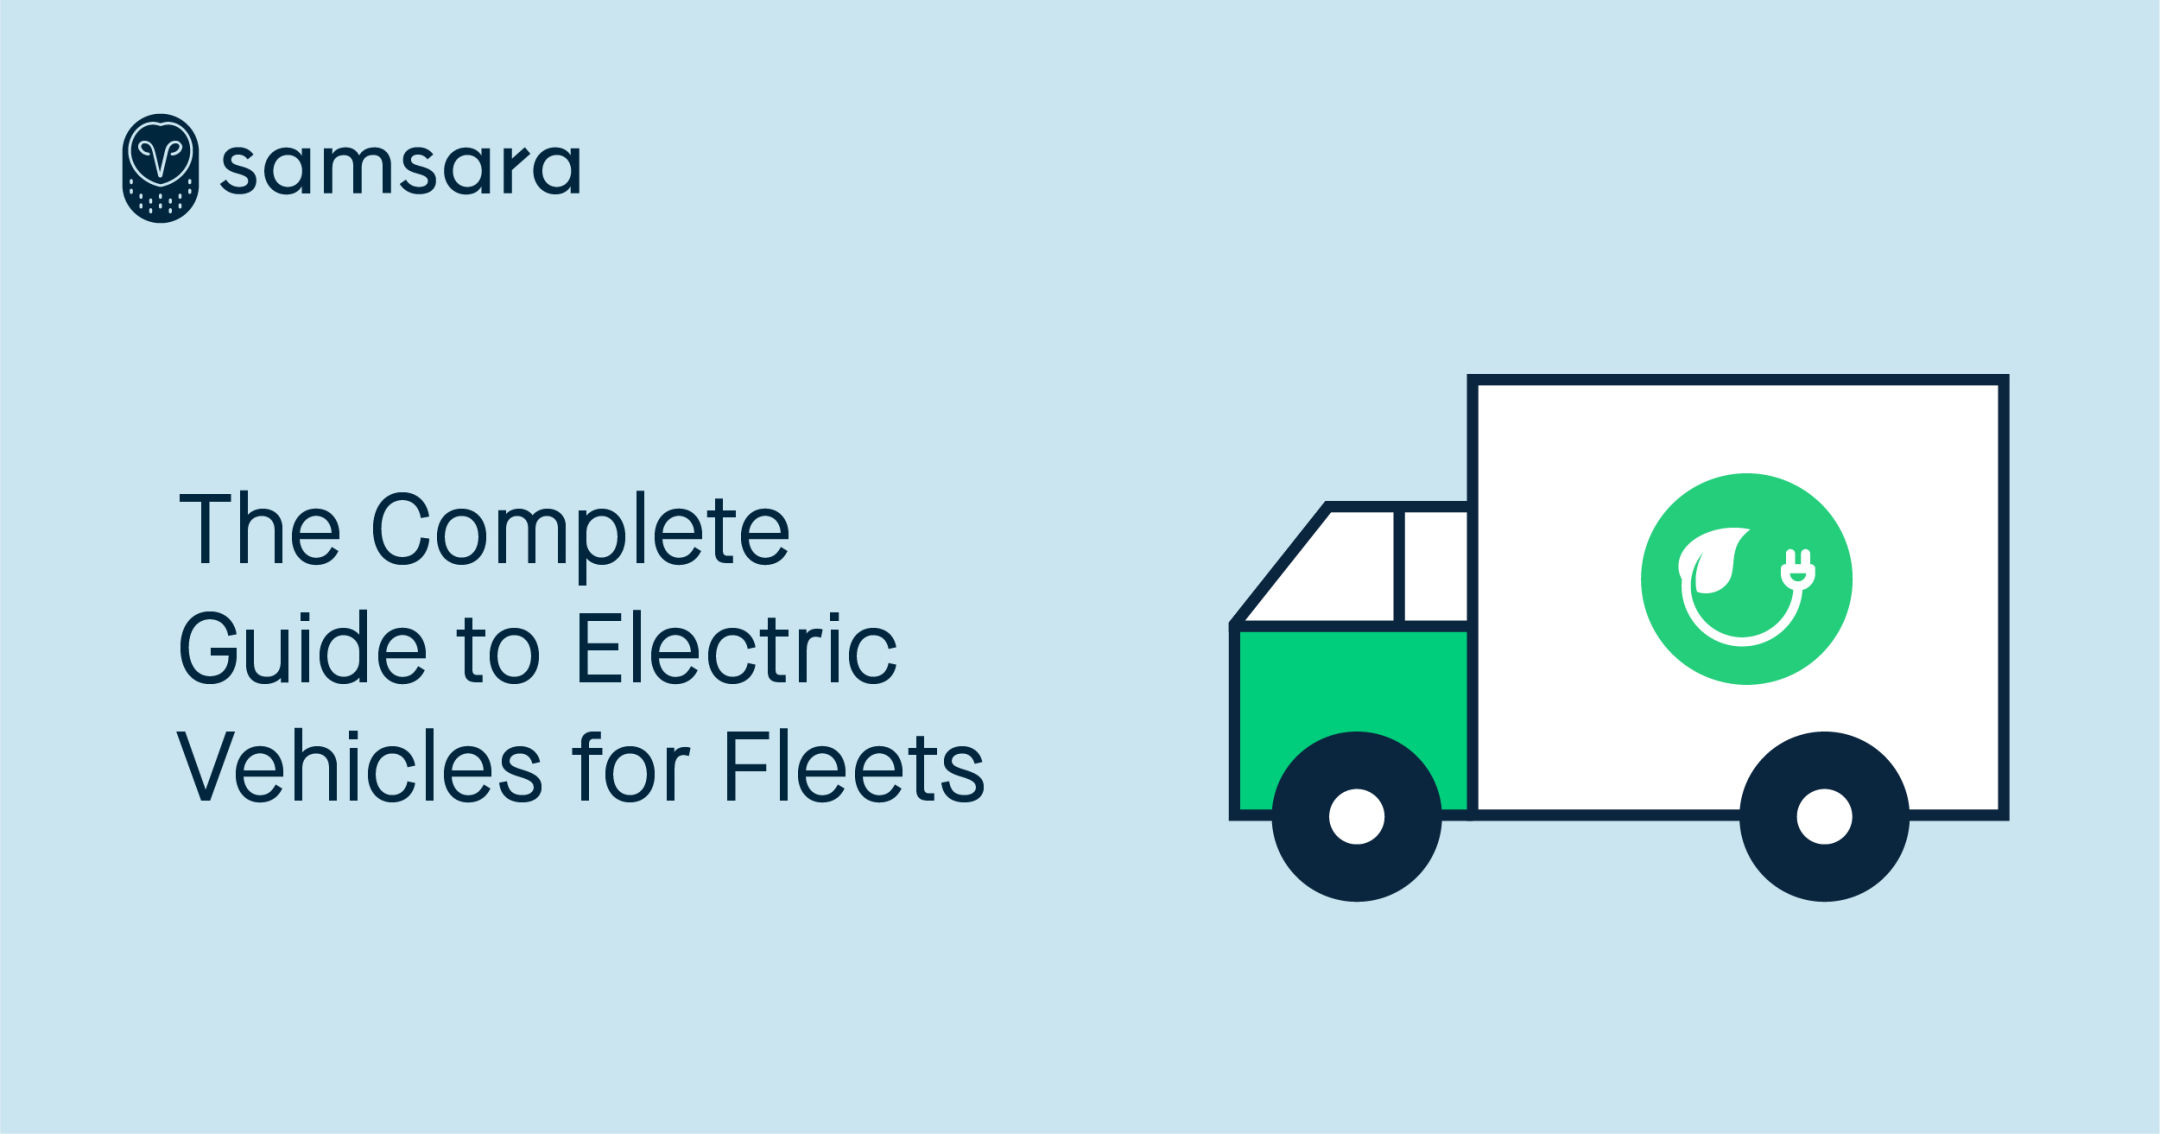 The Complete Guide to Electric Vehicles for Fleets